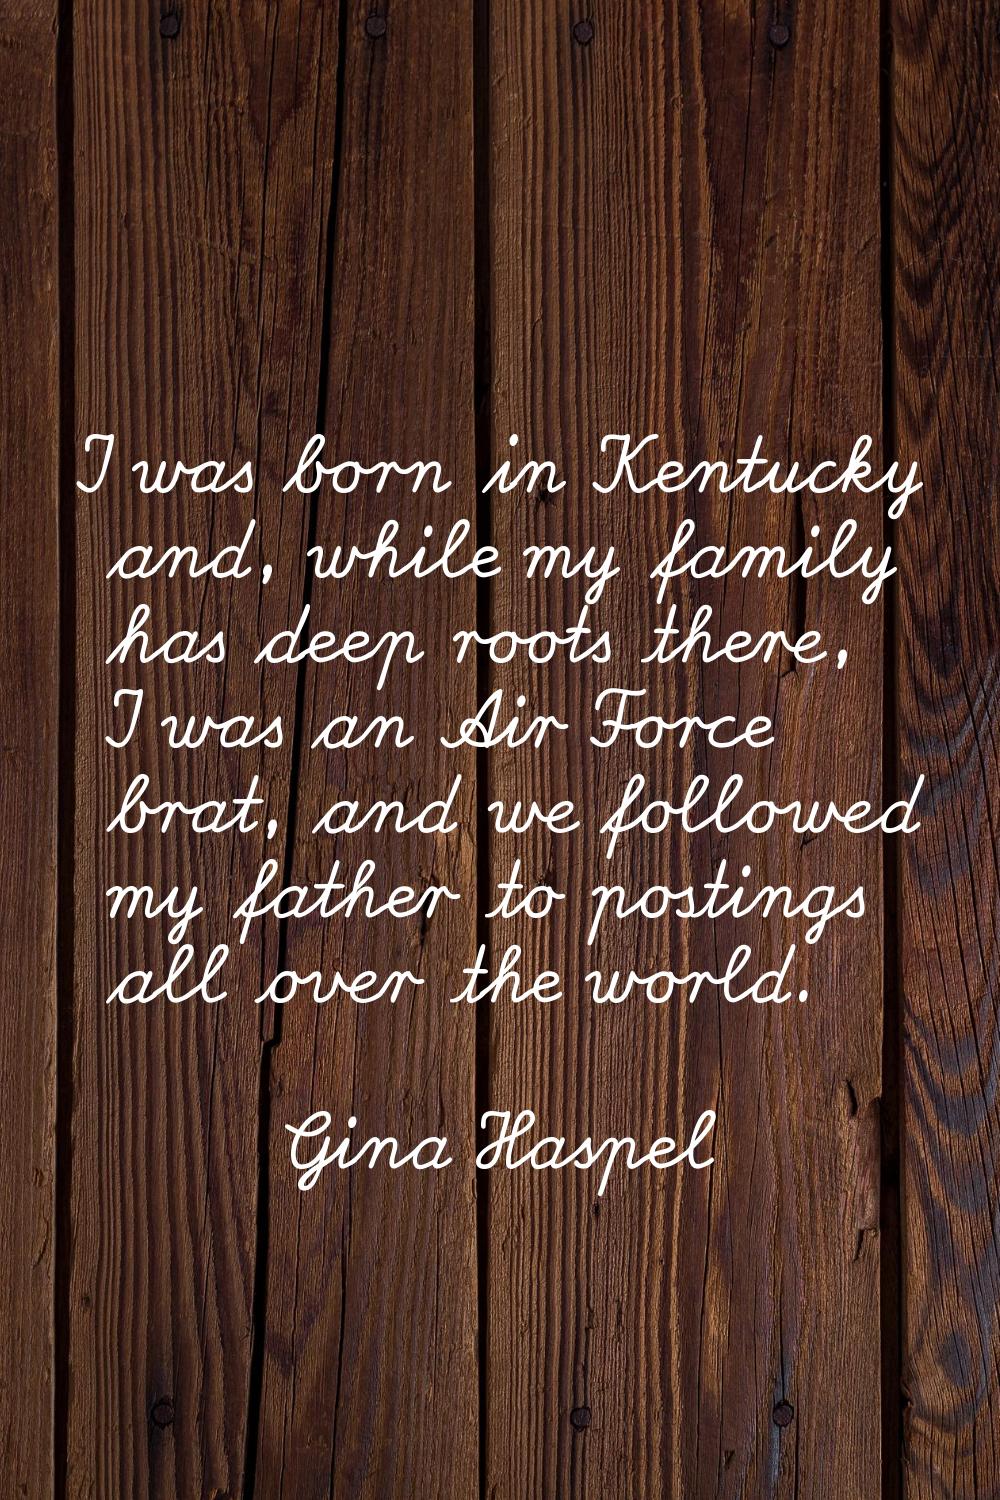 I was born in Kentucky and, while my family has deep roots there, I was an Air Force brat, and we f